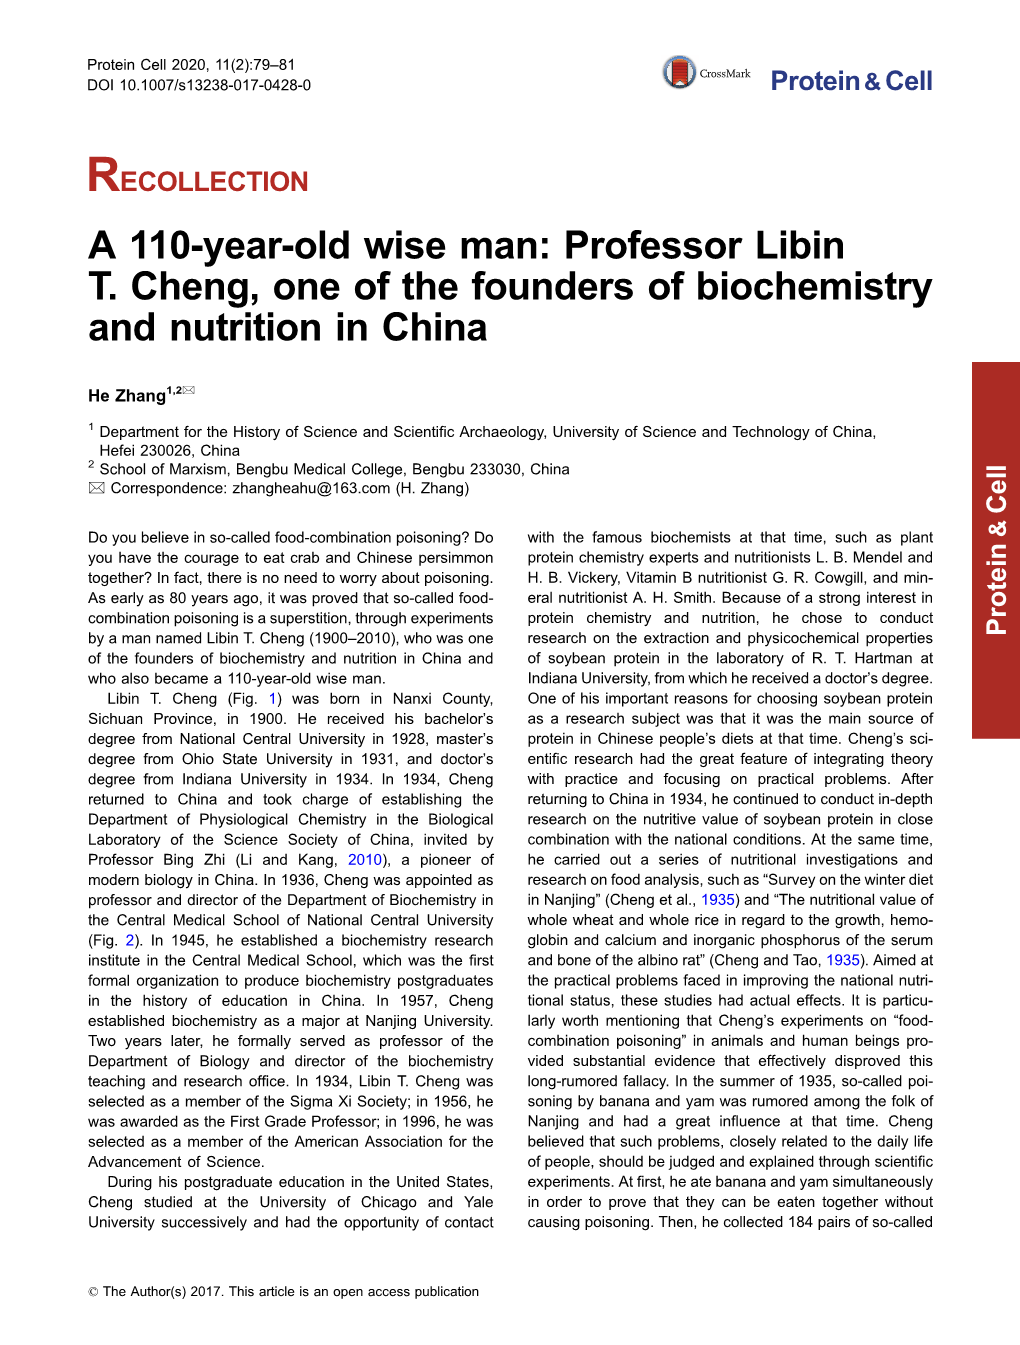 A 110-Year-Old Wise Man: Professor Libin T. Cheng, One of the Founders of Biochemistry and Nutrition in China